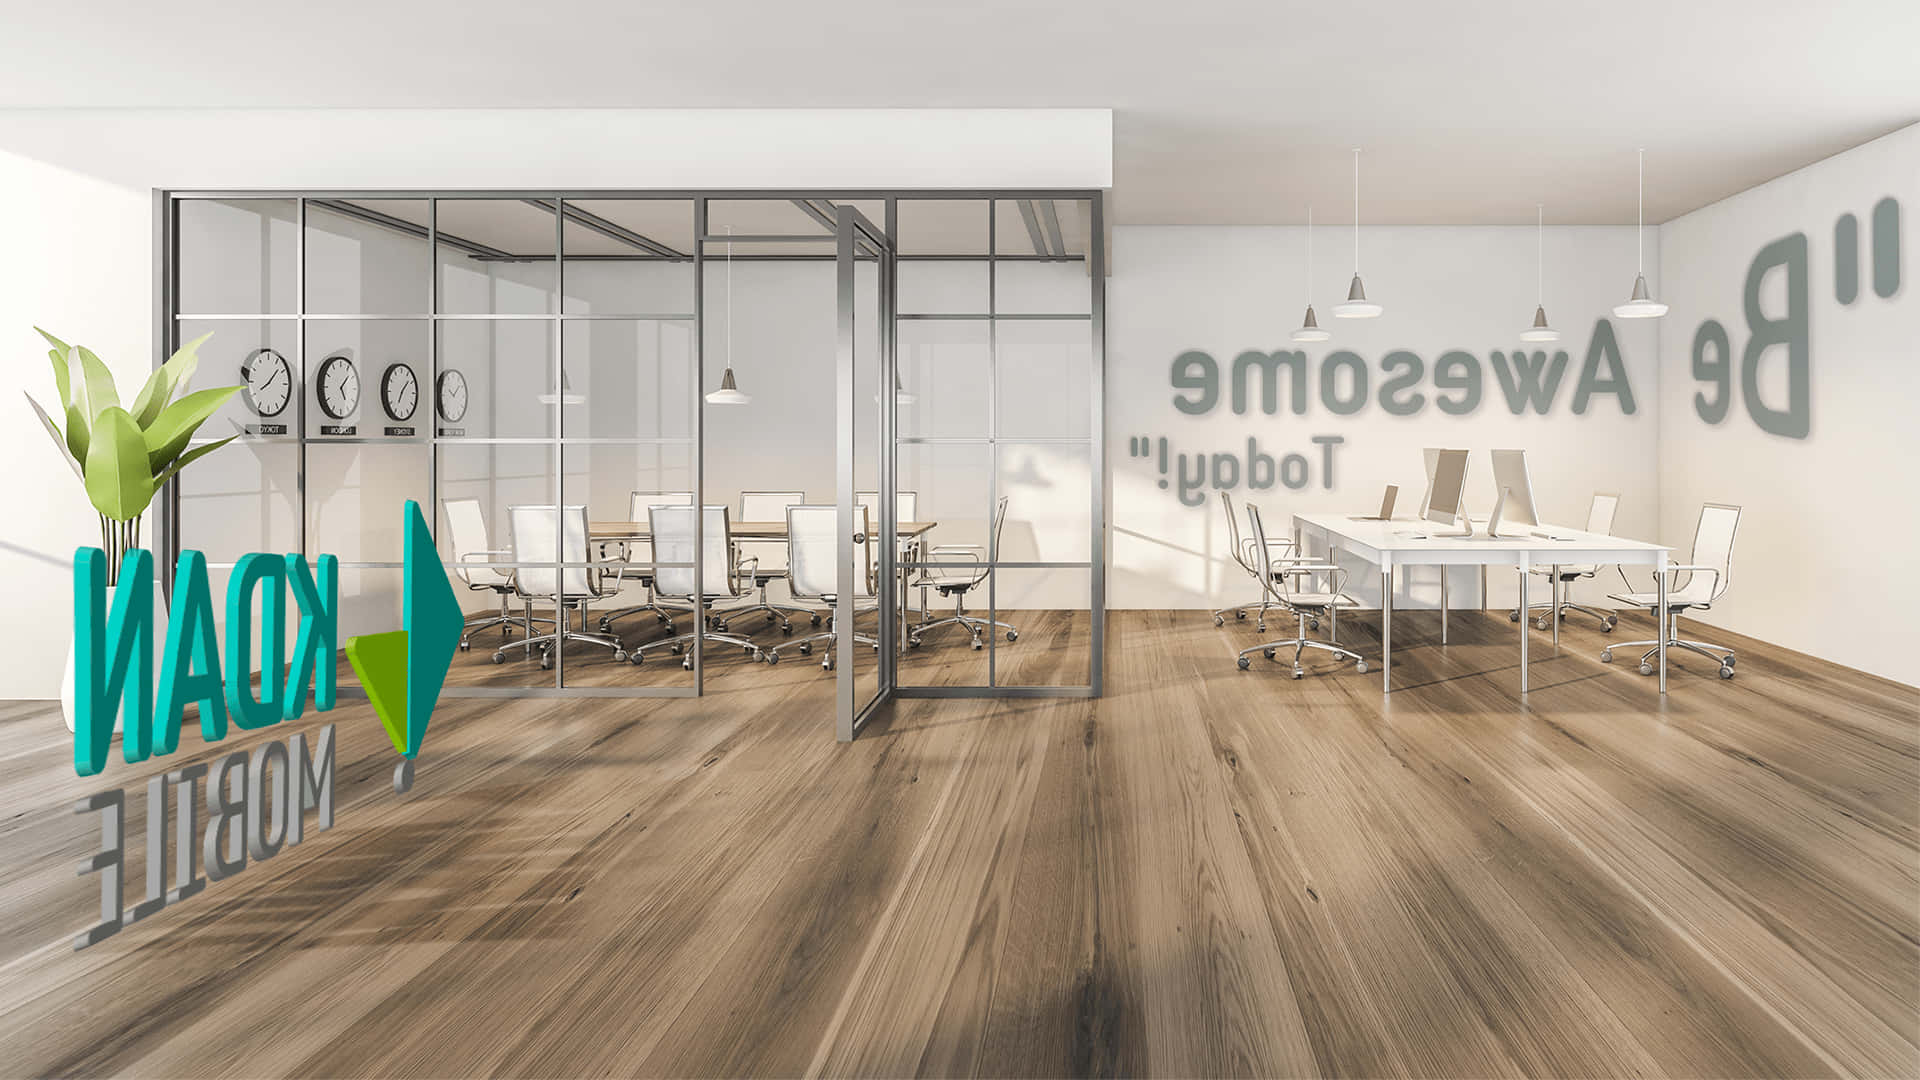 A 3d Rendering Of A Conference Room With A Sign That Says Be Awesome